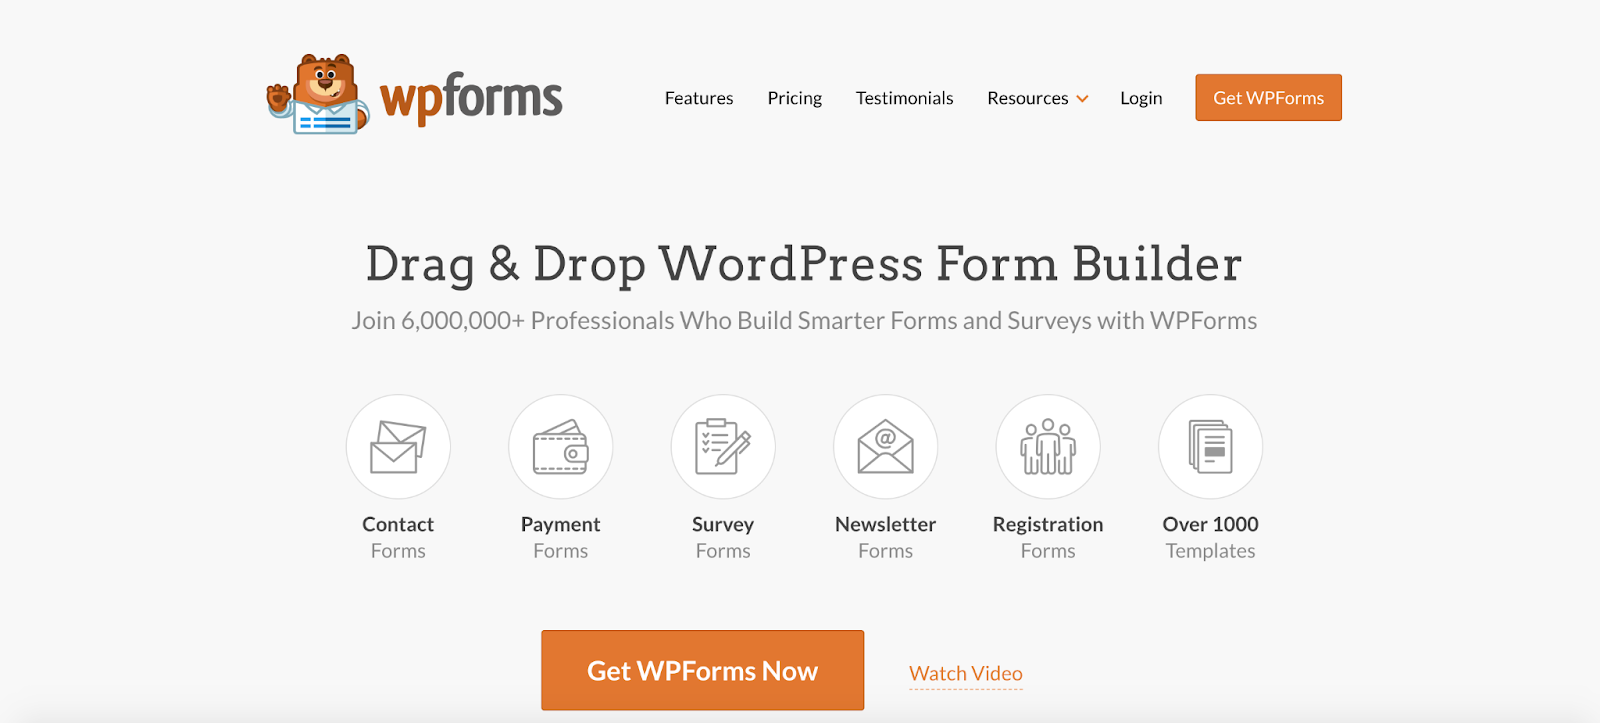 A screenshot of the WPForms homepage featuring a breakdown of the plugin’s benefits as well as a CTA button